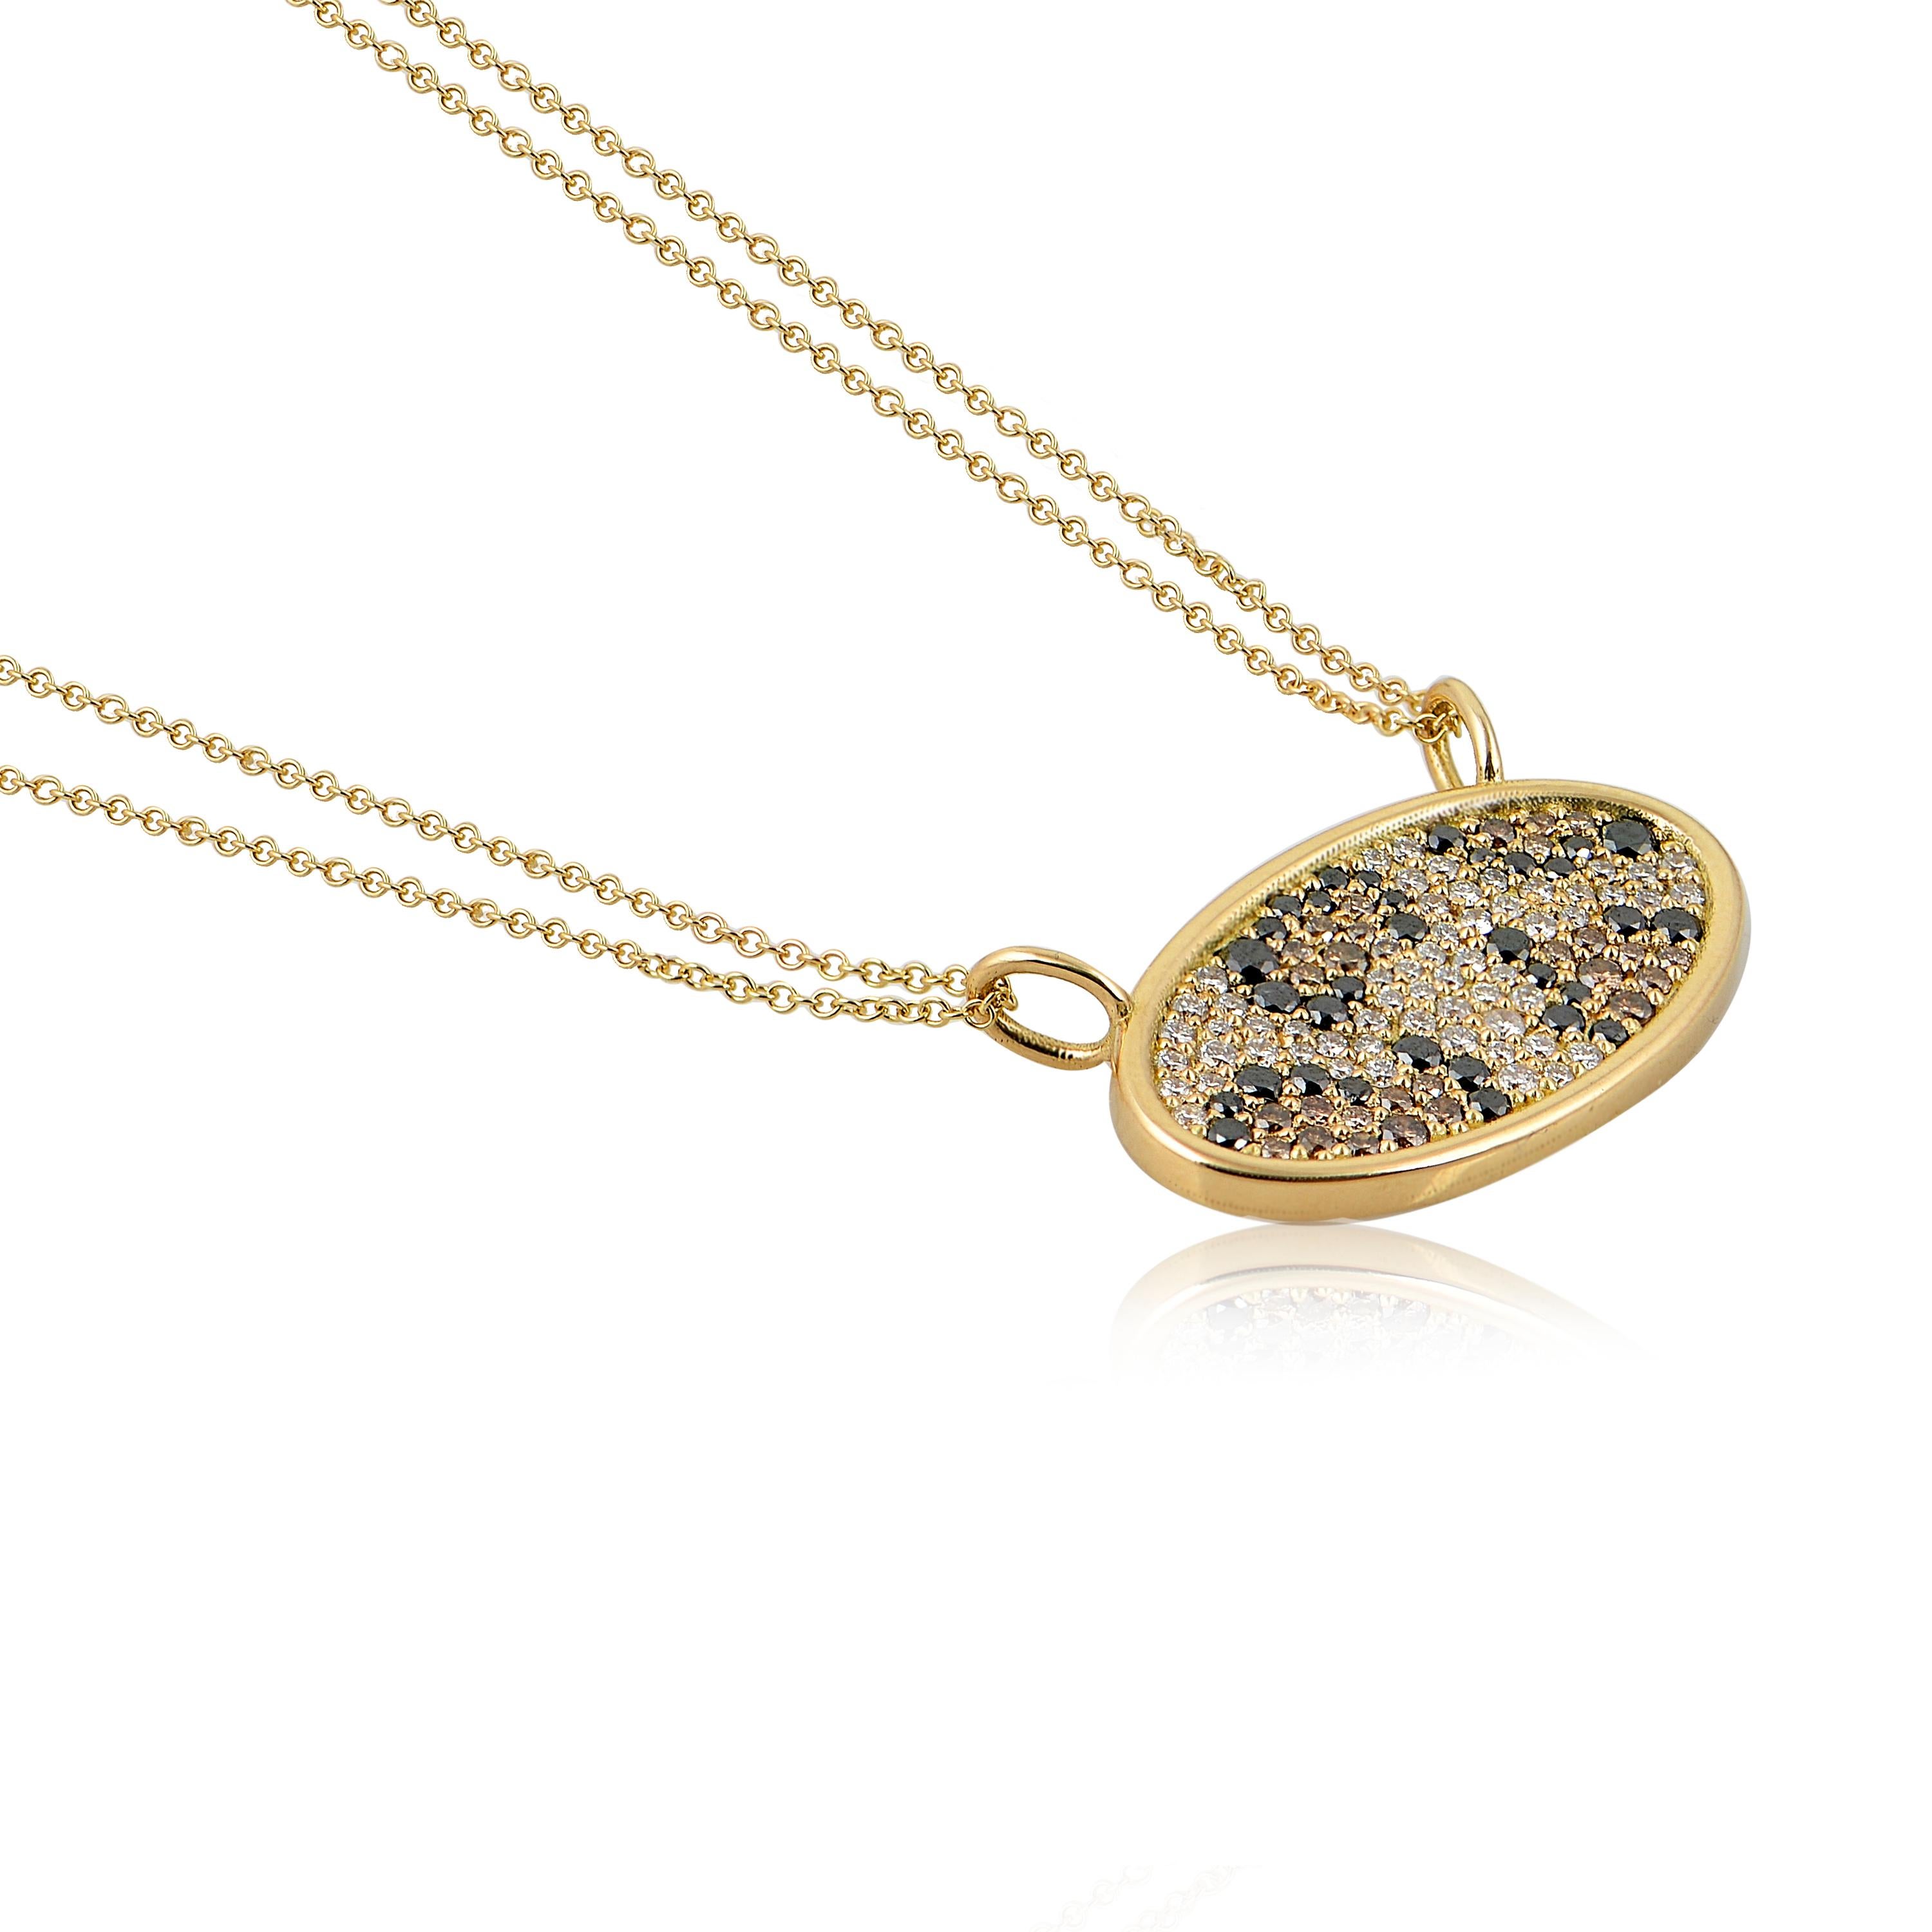 Designer: Alexia Gryllaki

Dimensions: motif 23x13mm, double-chain 800mm (half when folded)
Weight: approximately 6.1g 
Barcode: NEX2001


Leopard print oval pendant in 18 karat yellow gold with a double-chain and mosaic pavé made of round